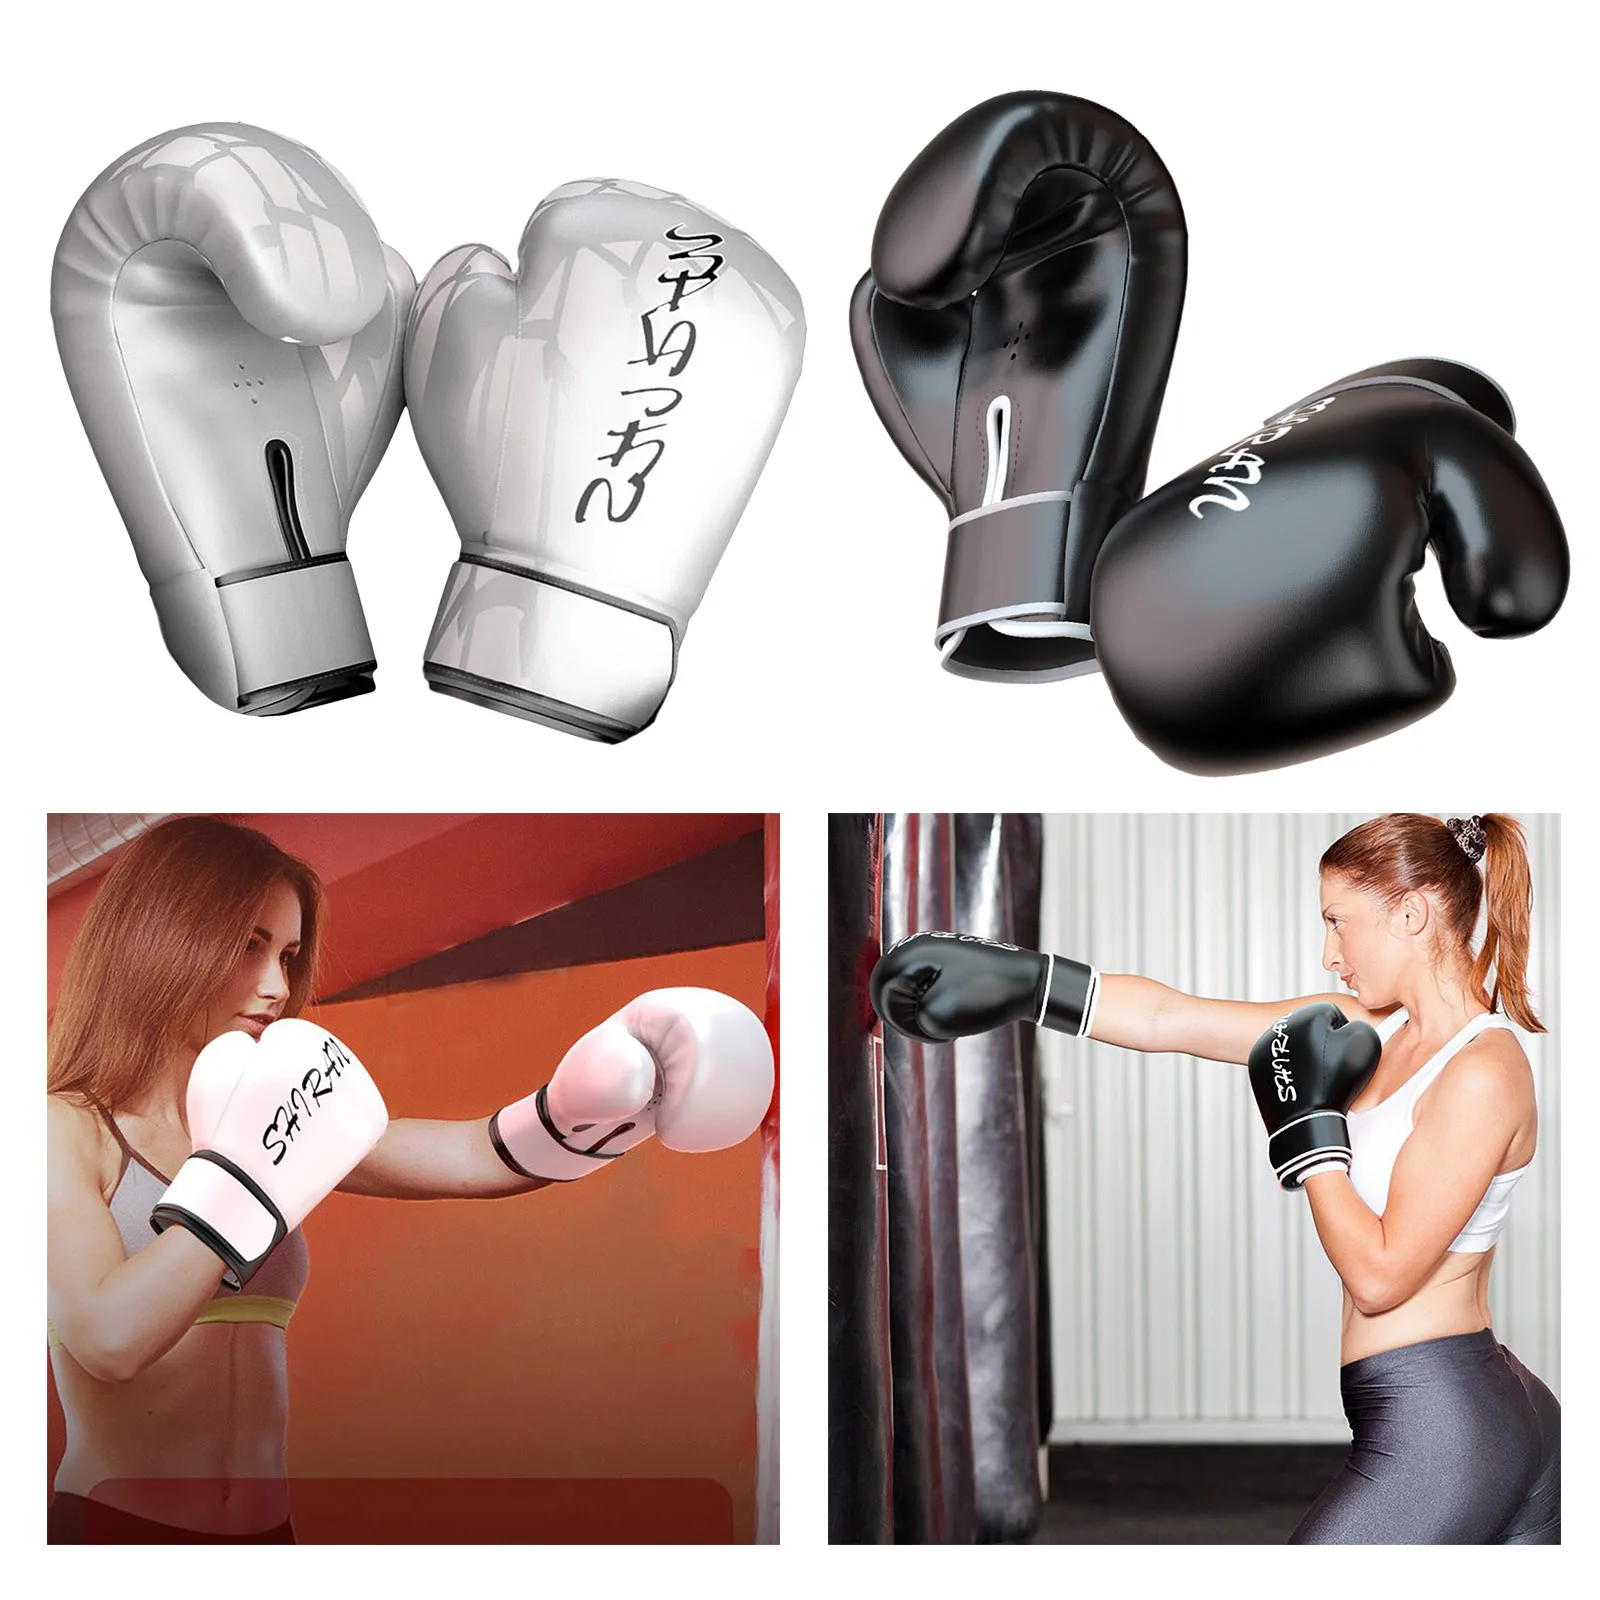 PU Leather MMA Muay Fighting Punching Gloves Sparring Boxing Training Mitts Hot 